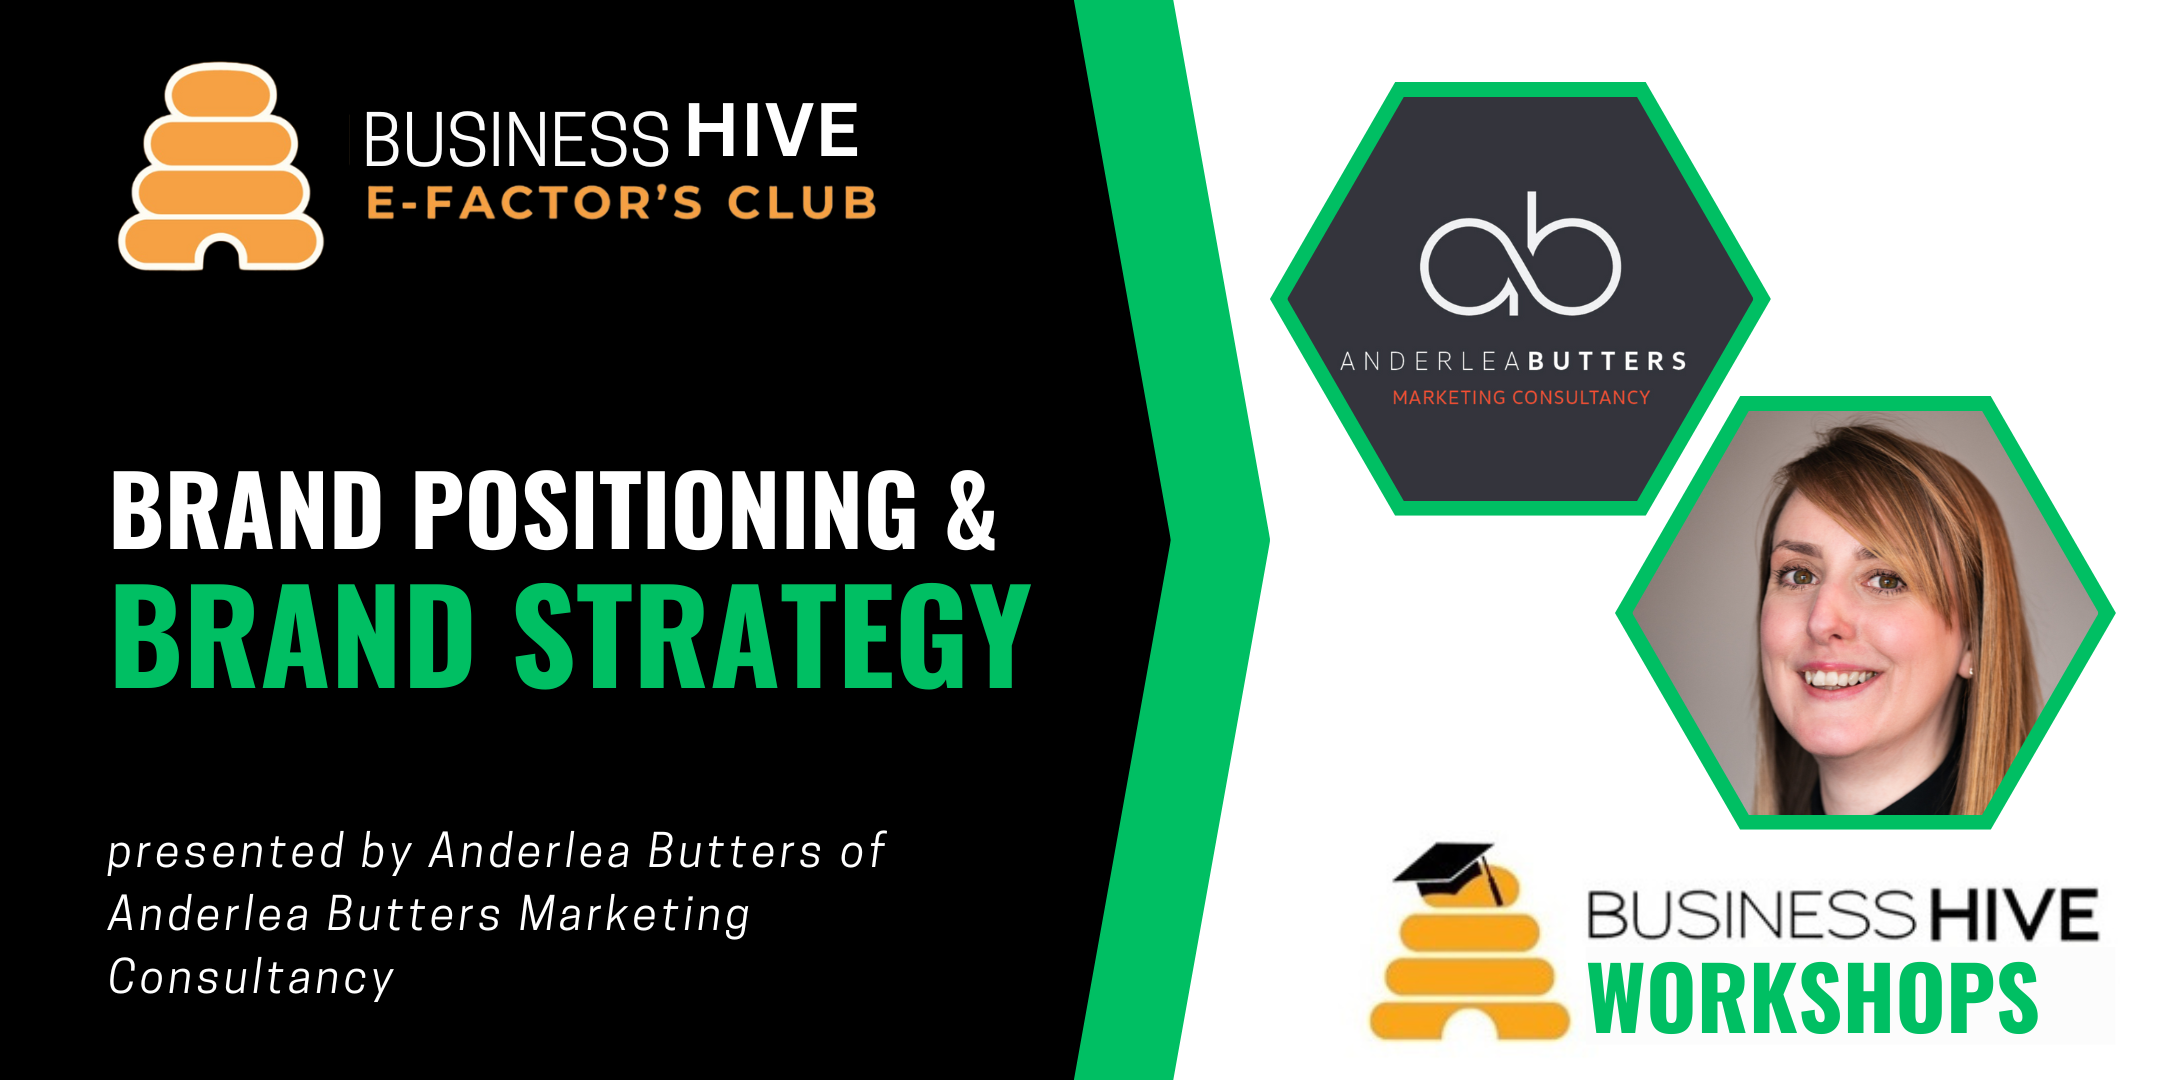 Promotional graphic for a Brand Strategy and Brand Positioning workshop by Anderlea Butters Marketing Consultancy, hosted by Business Hive E-Factor's Club.